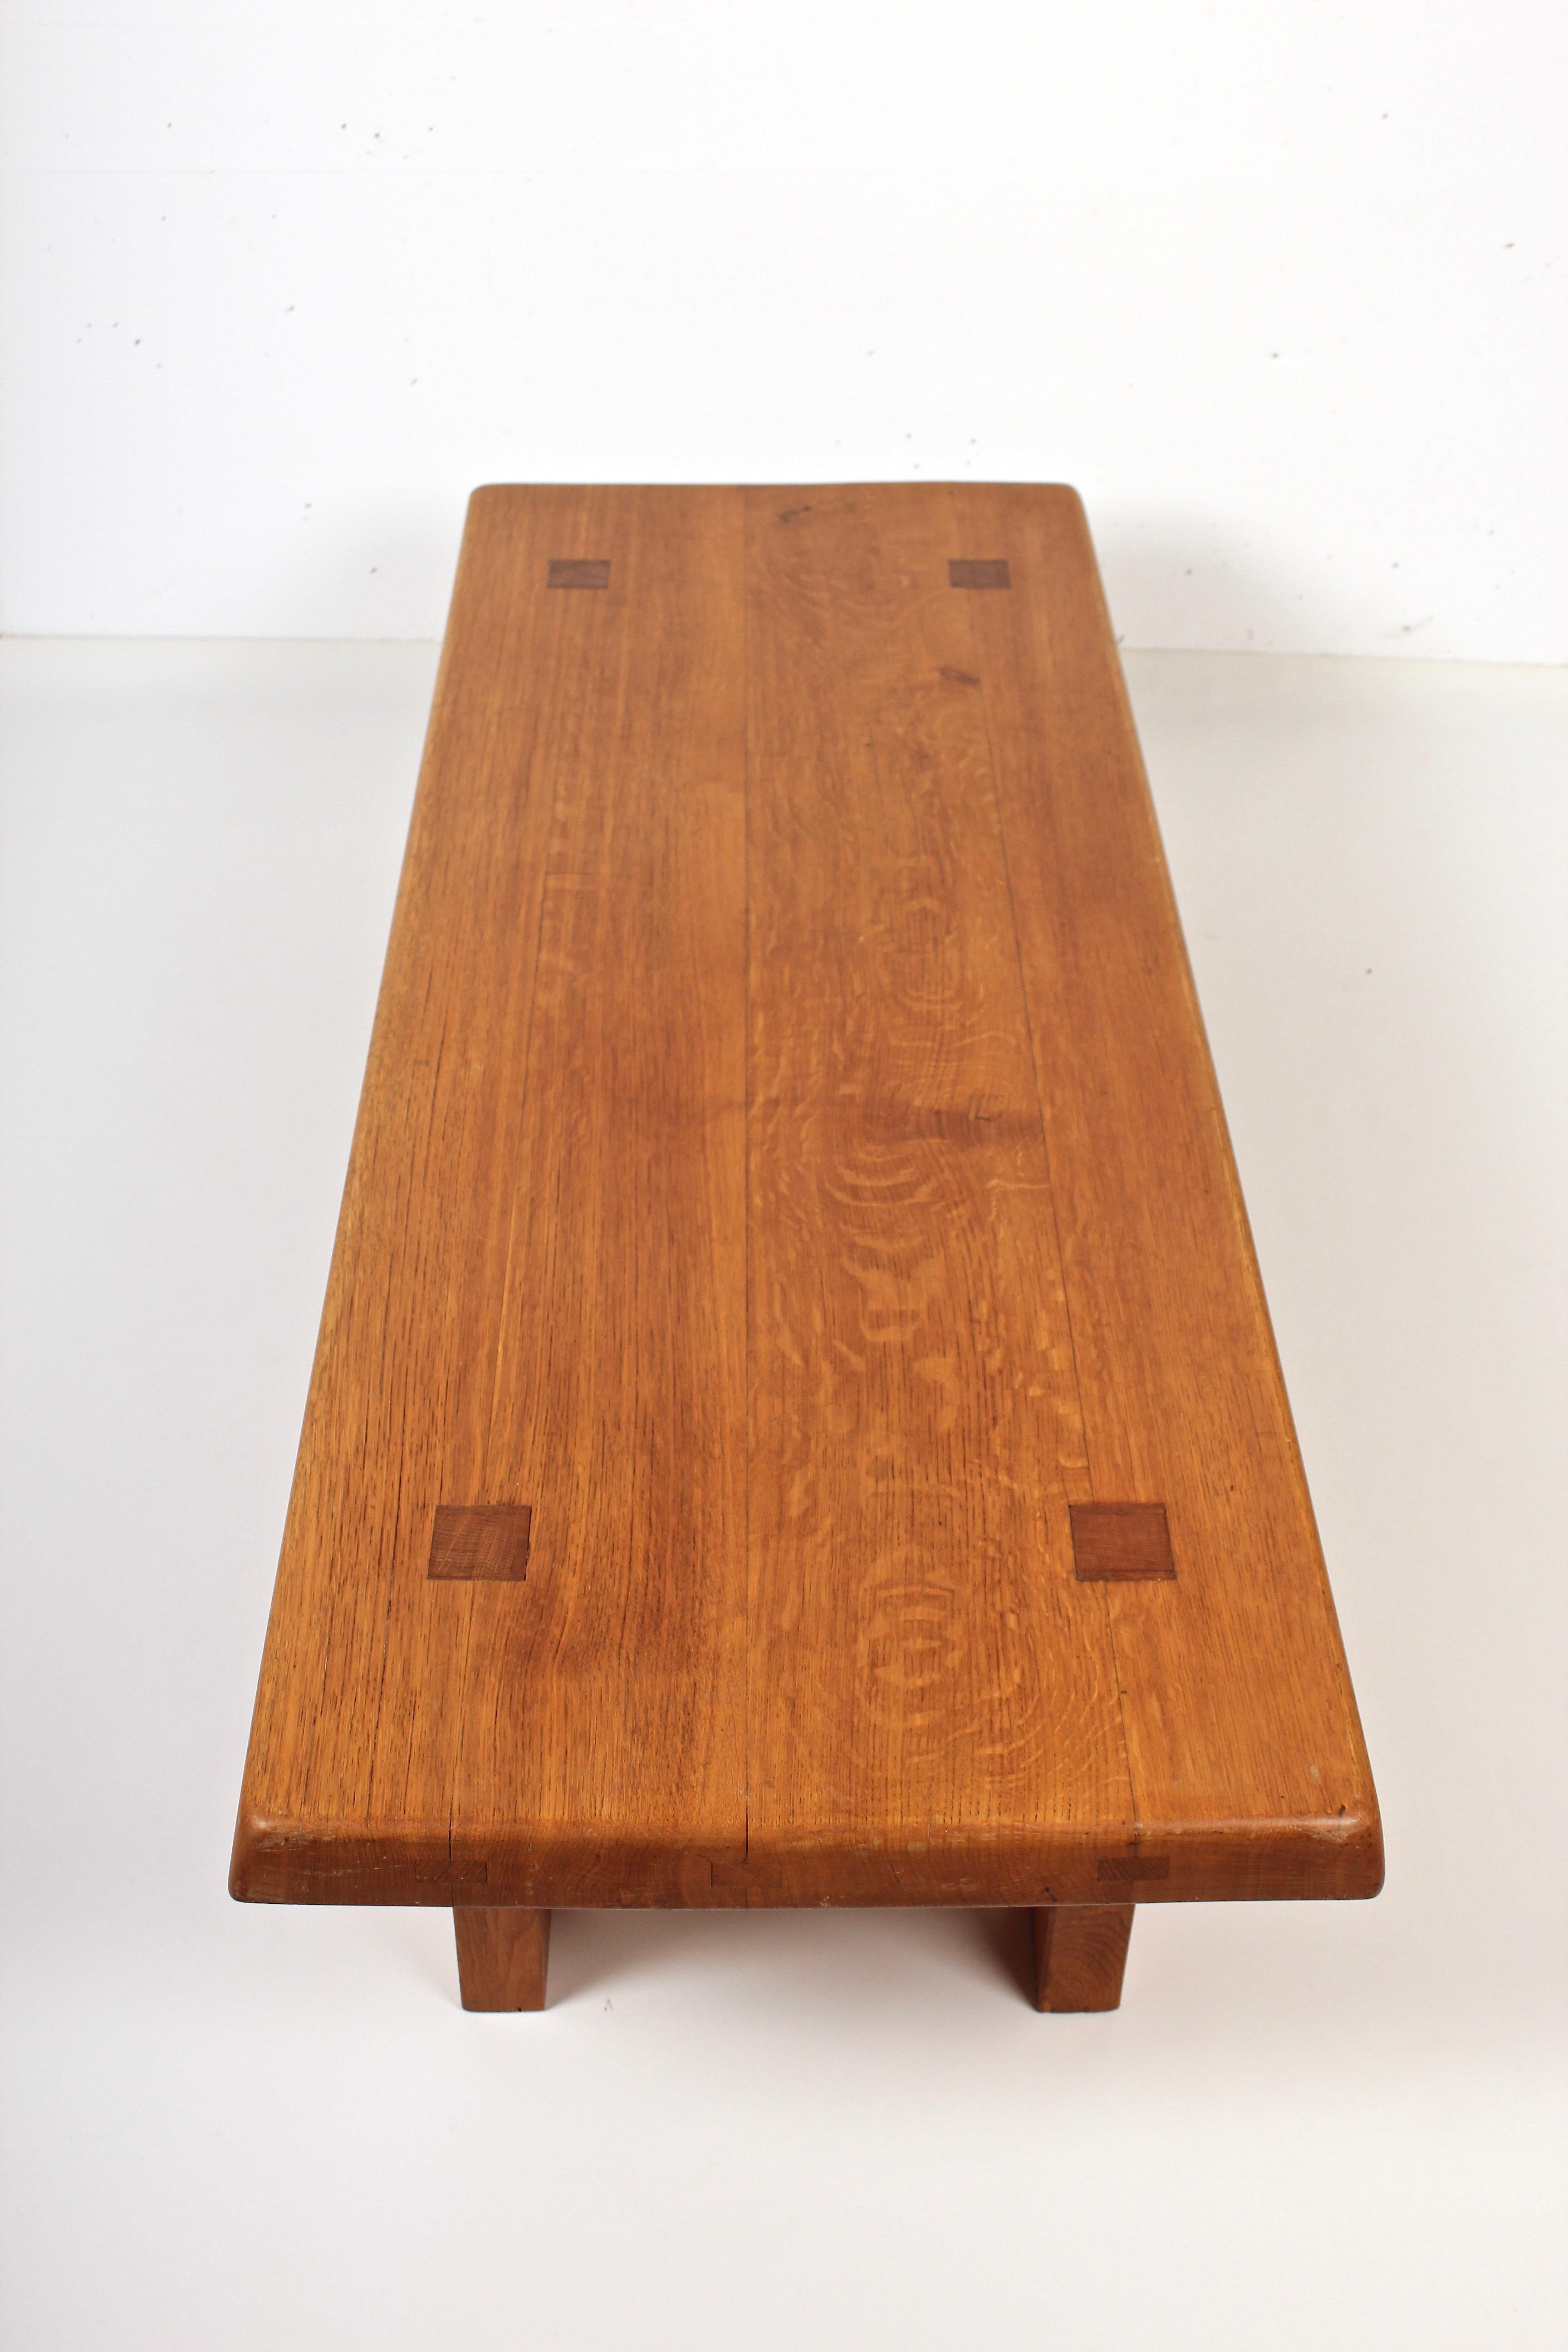 Pierre Chapo Four-Mortise Coffee Table, T08, French Elm, 1965 In Good Condition In Santa Gertrudis, Baleares